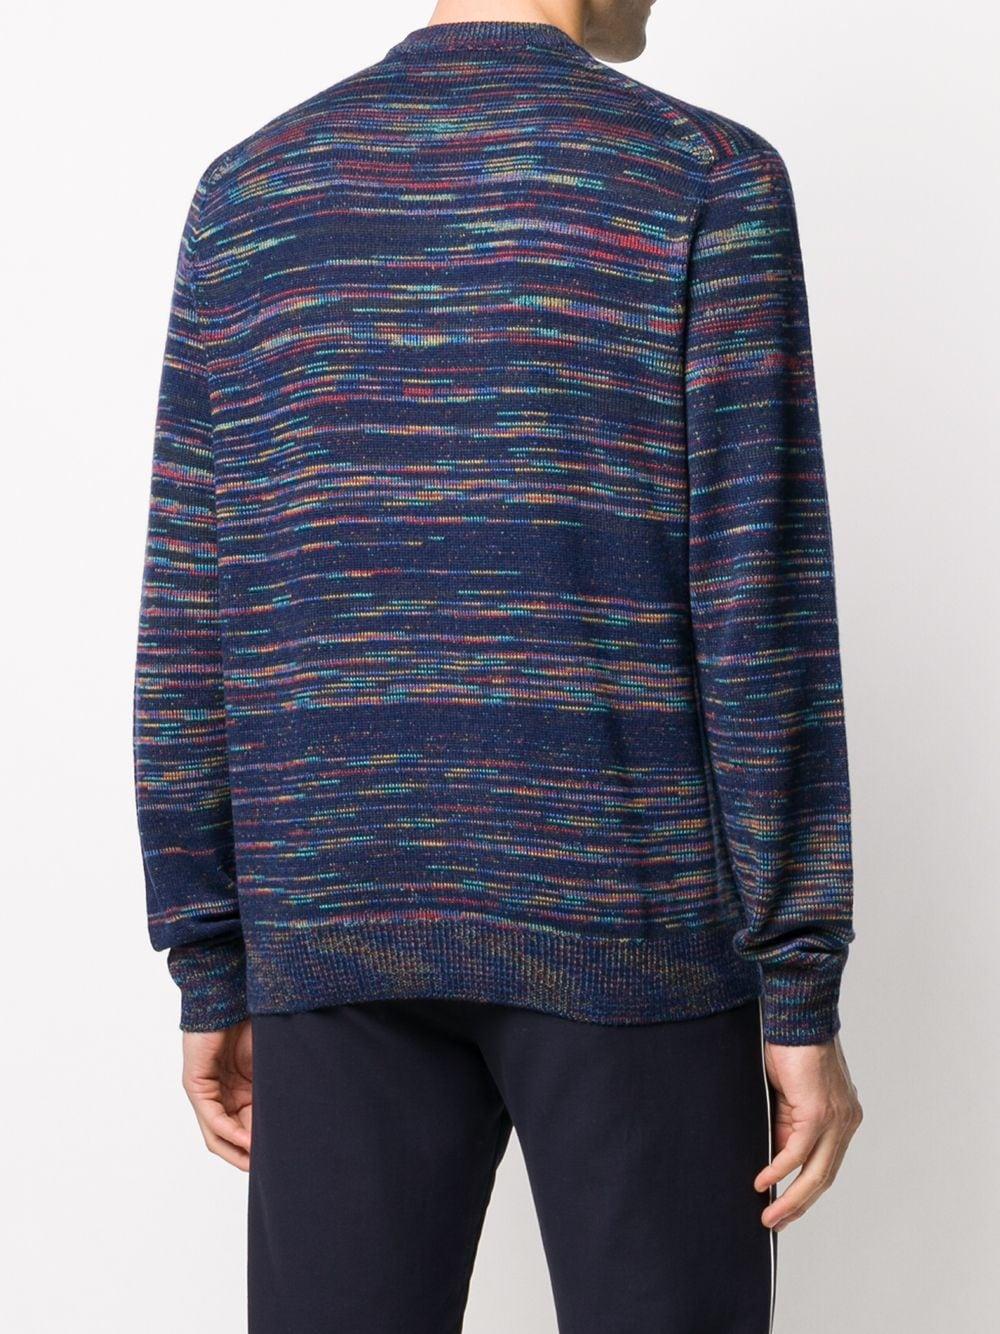 Missoni Wool Abstract Striped Jumper in Blue for Men - Lyst